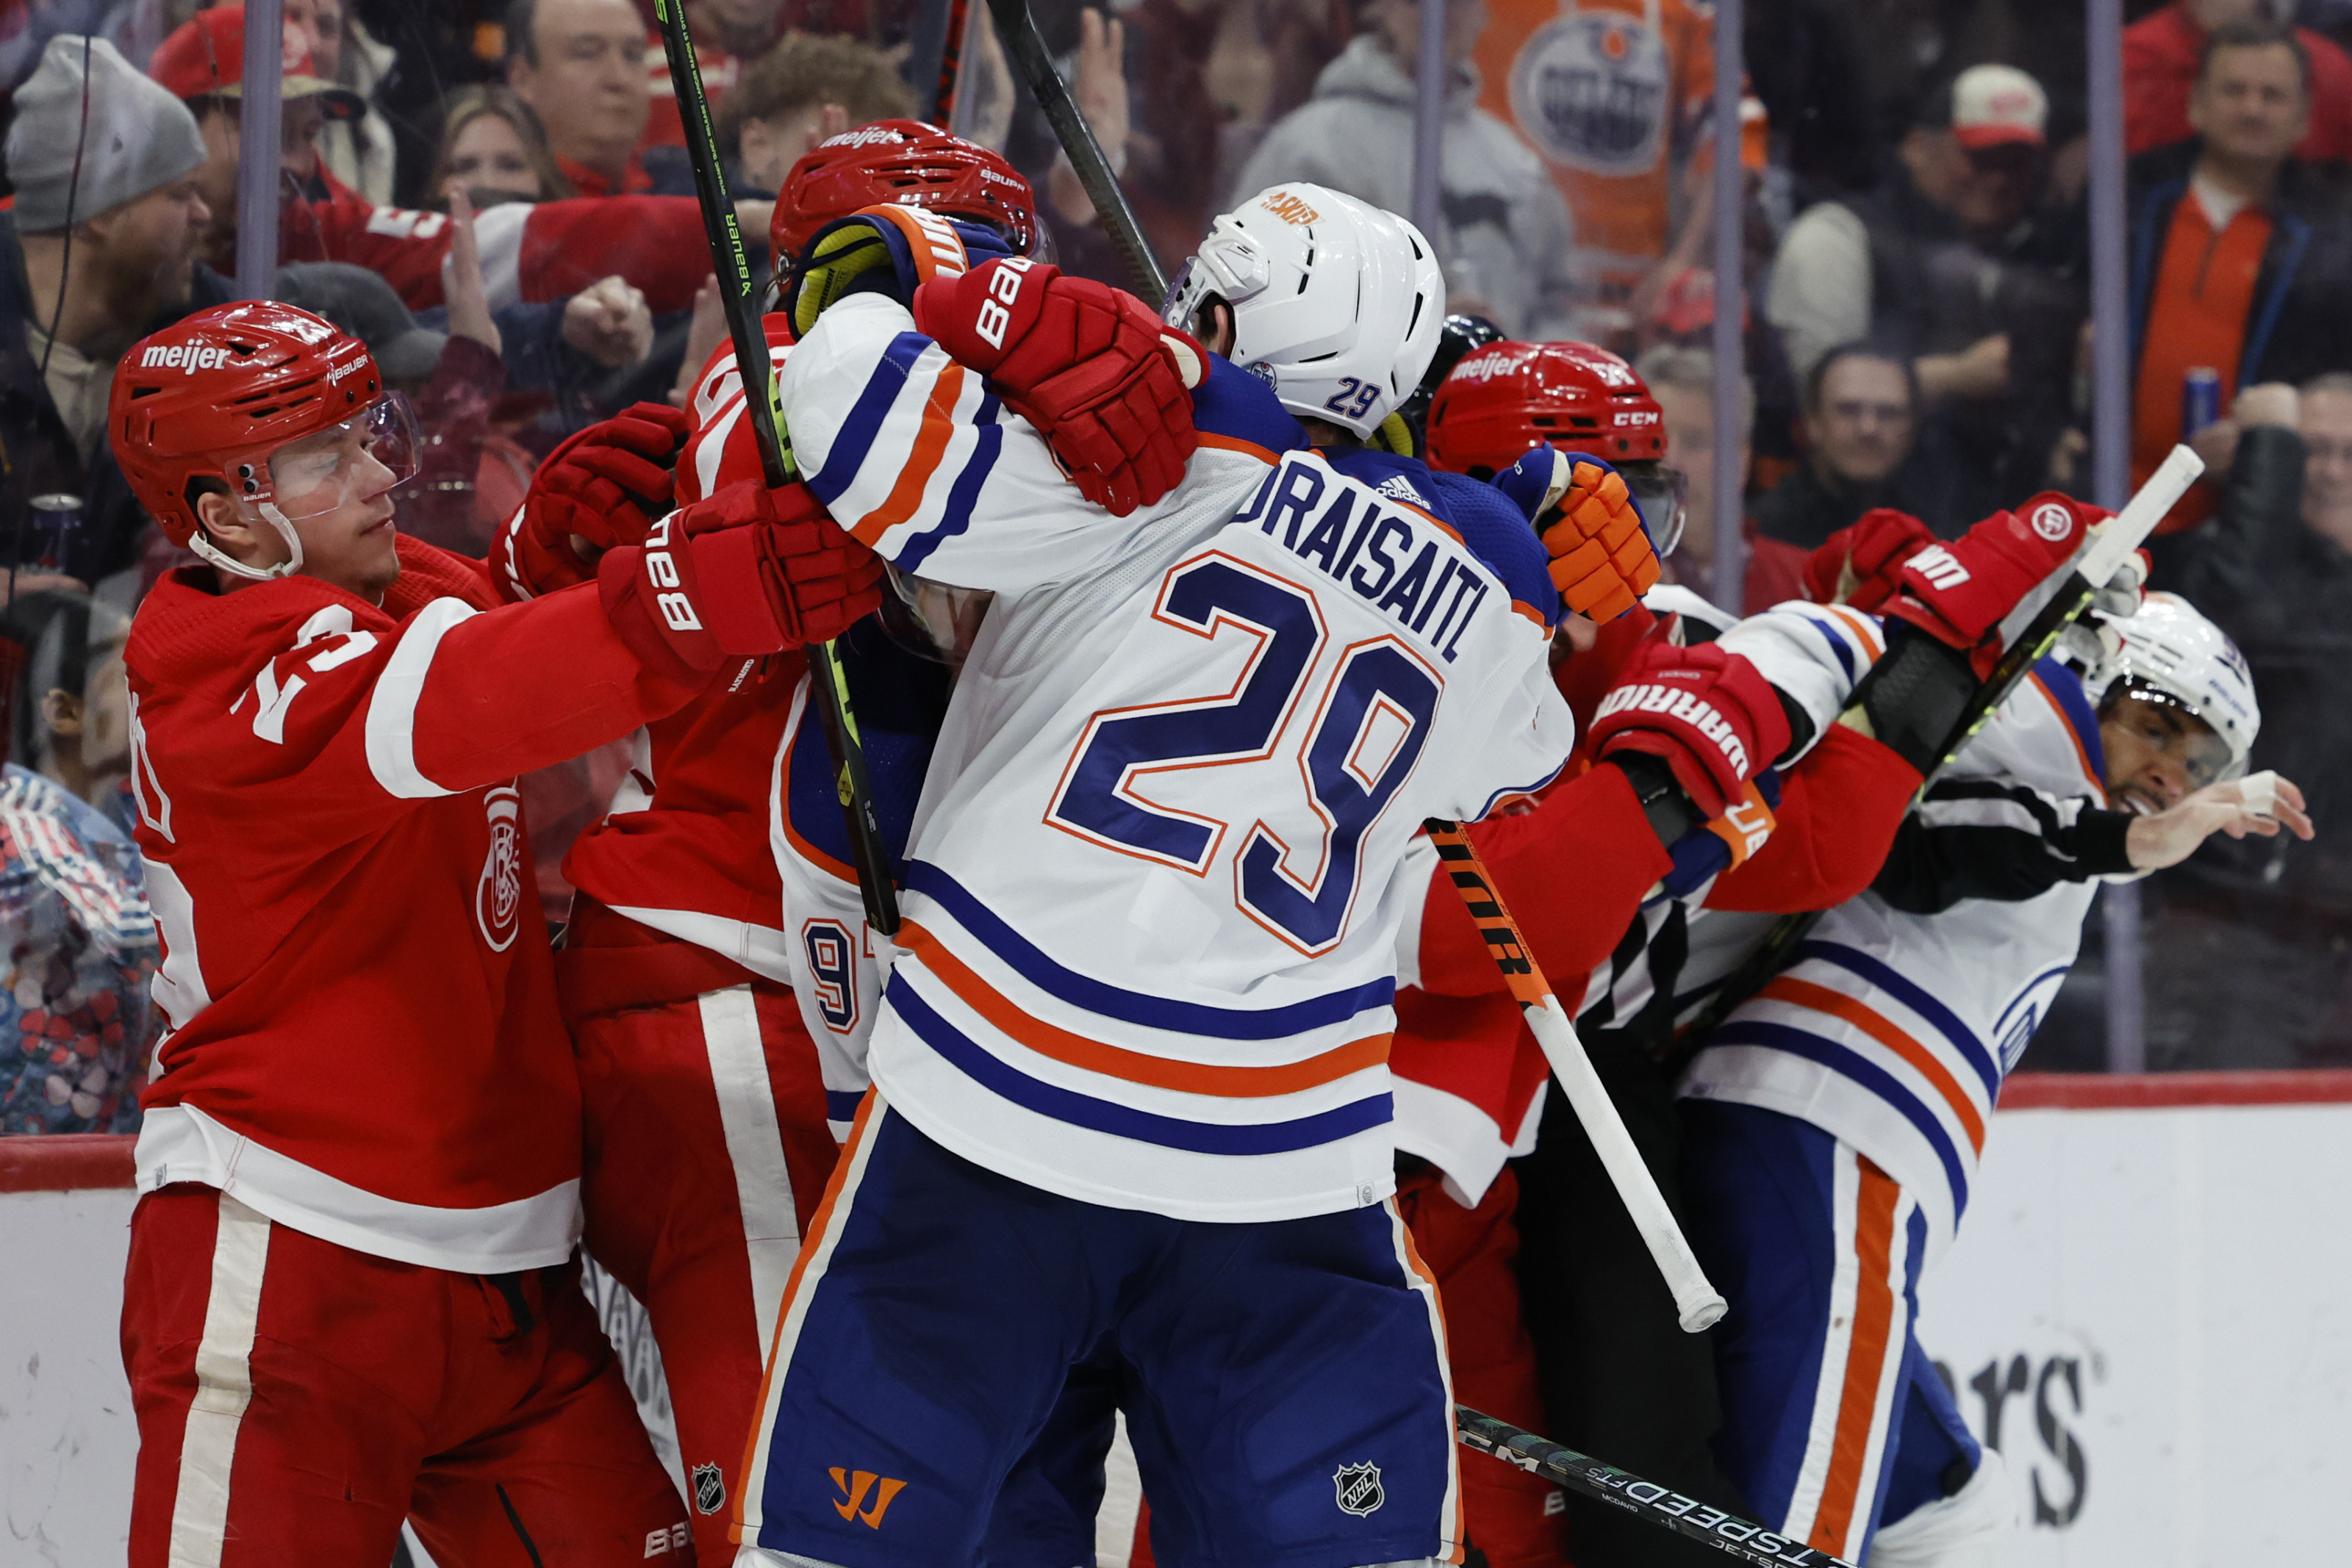 Leon Draisaitl at a loss for words after Oilers' season-ending